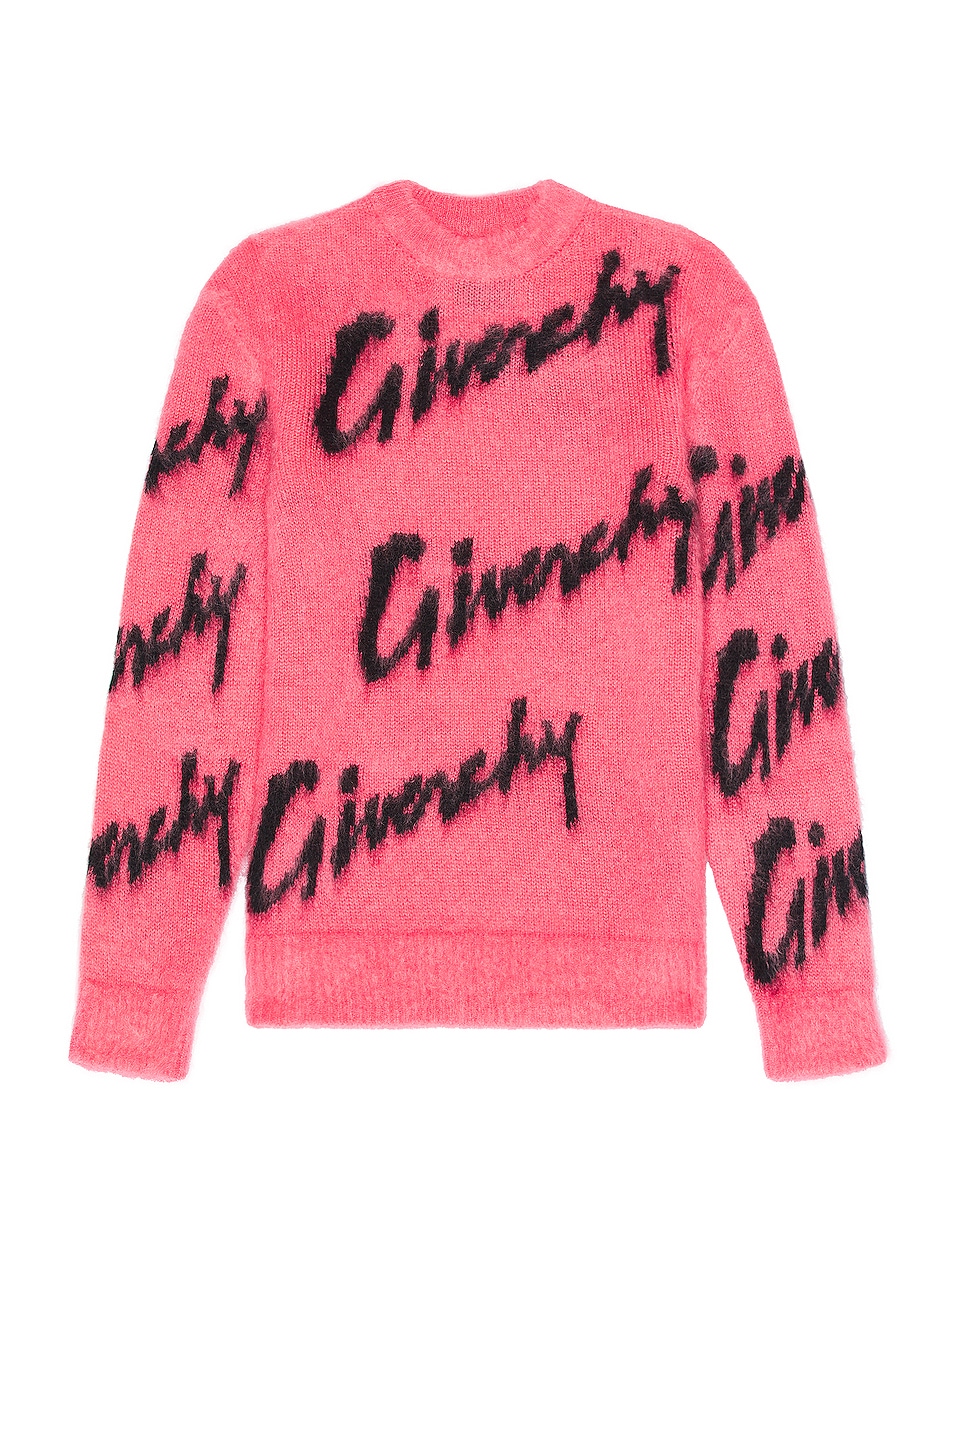 Image 1 of Givenchy Intarsia Mohair Sweater in Pink & Black